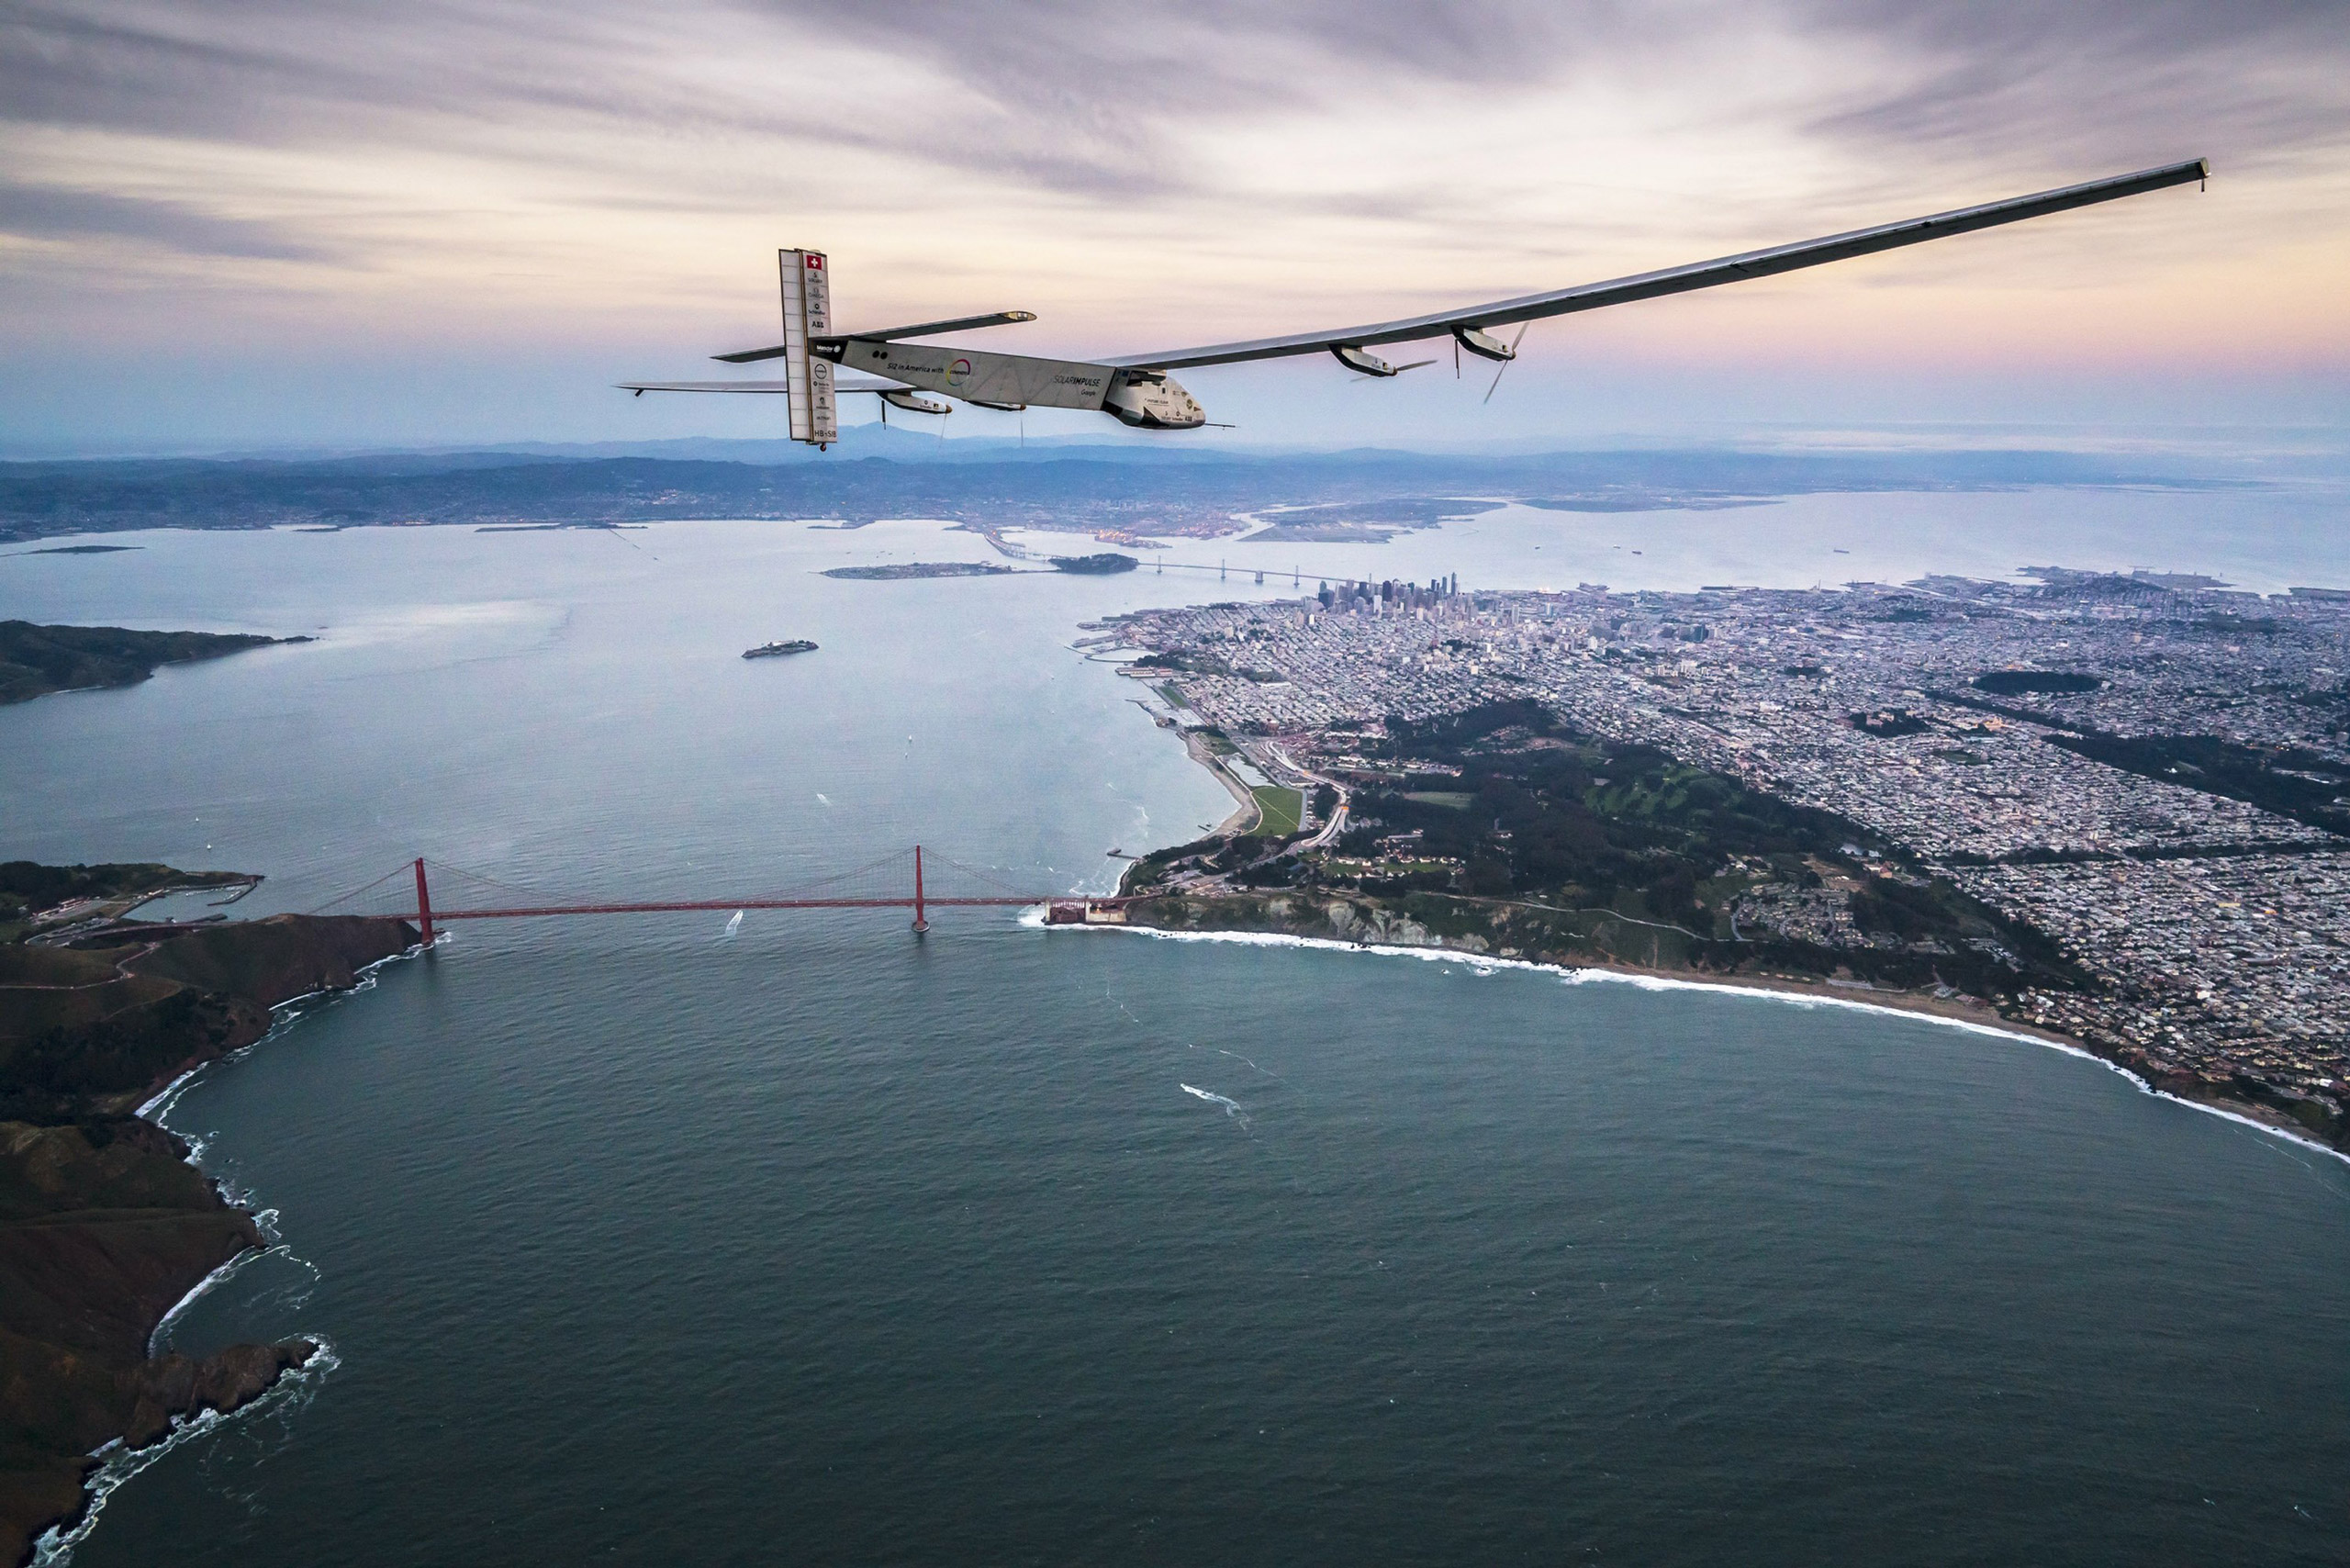 SAN FRANCISCO, CA - APRIL 23:  In this handout image supplied by Jean Revillard, Solar powered plane 'Solar Impulse 2', piloted by Swiss adventurer Bertrand Piccard, flys over the Golden Gate bridge in San Francisco, after a flight from Hawaii during its circumnavigation, before landing at Moffett Airfield in Mountain View in Silicon Valley, on April 23, 2016 in San Francisco, California. The Solar Impulse 2 is equipped with 17,000 solar cells, has a wingspan of 72 metres, and yet weighs just over 2 tonnes. (Photo by Jean Revillard via Getty Images)